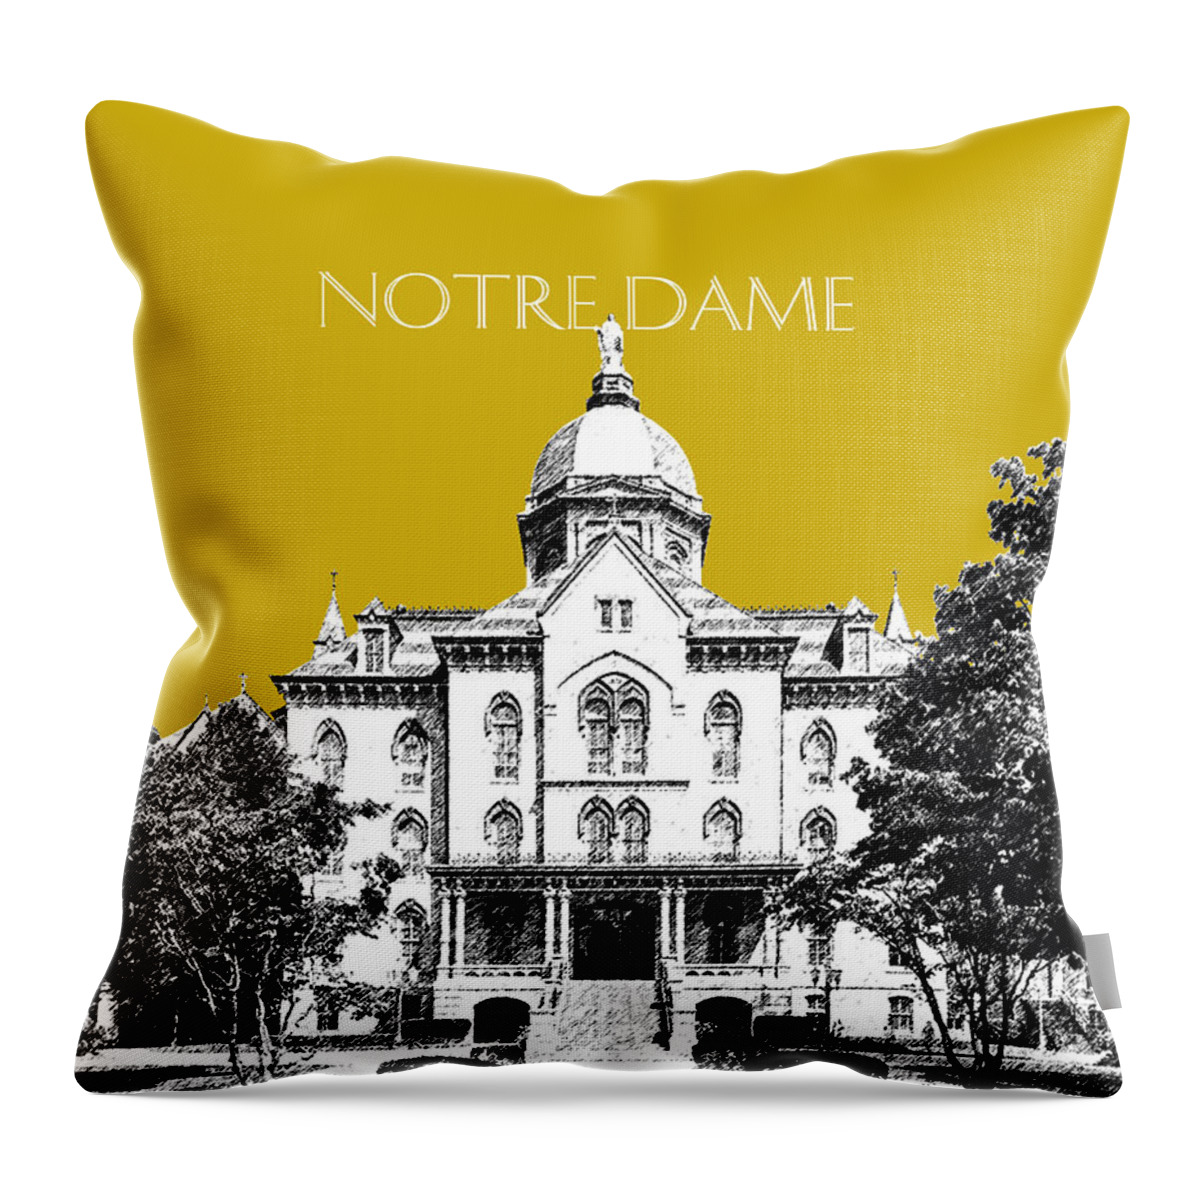 Architecture Throw Pillow featuring the digital art Notre Dame University Skyline Main Building - Gold by DB Artist